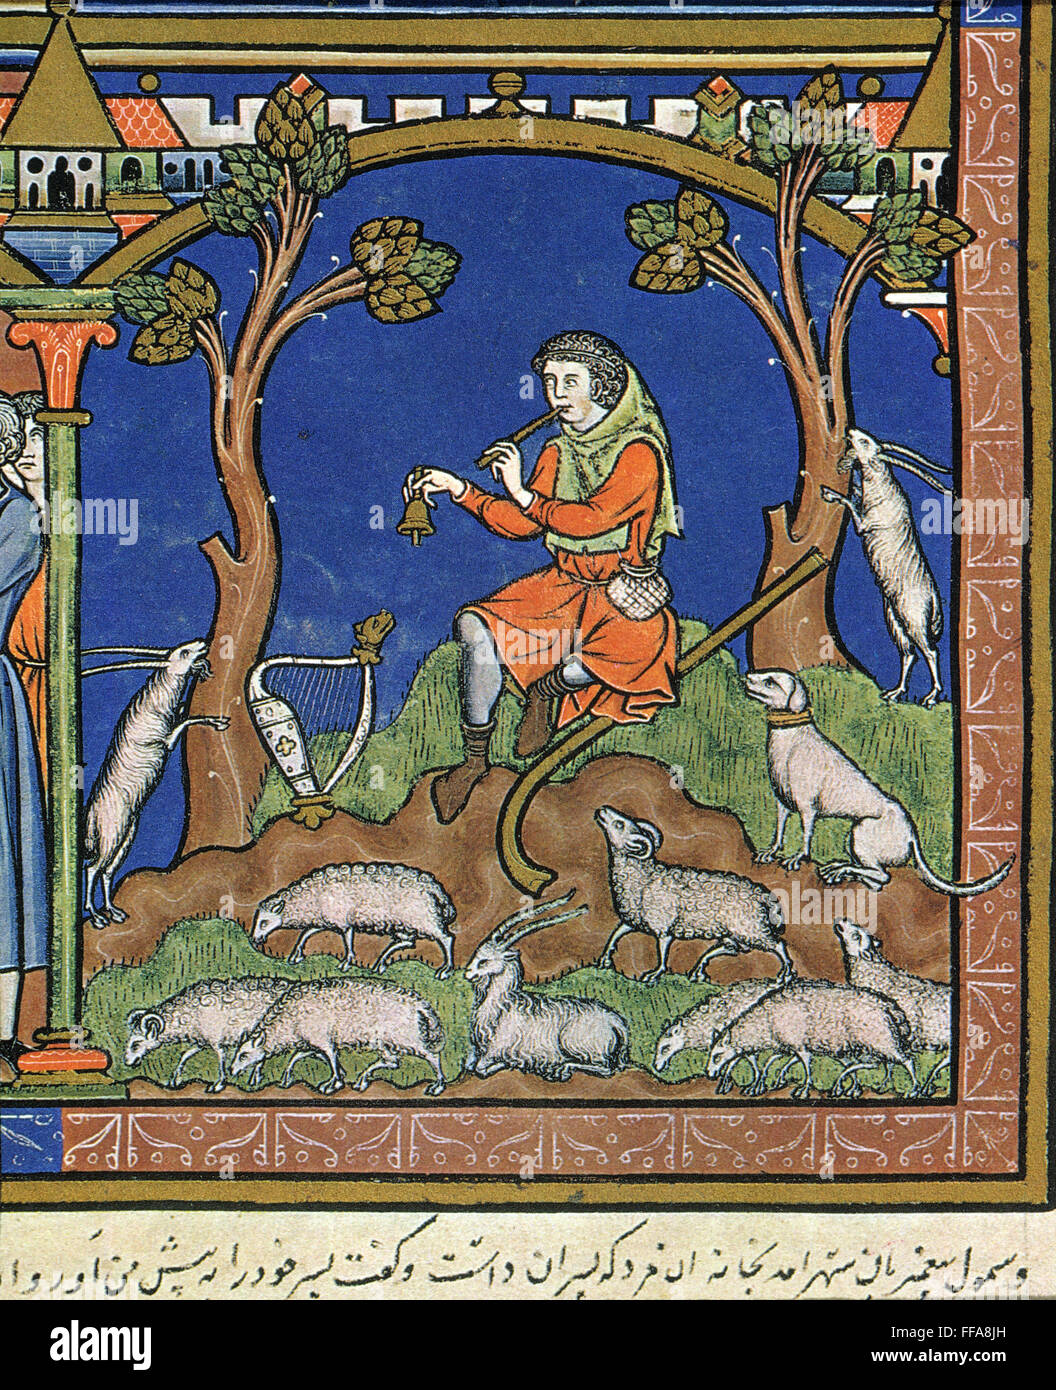 DAVID, THE YOUNG SHEPHERD. /nPlaying his pipe and a bell (I Samuel xvi: 5-11): French manuscript illumination, c1250. Stock Photo